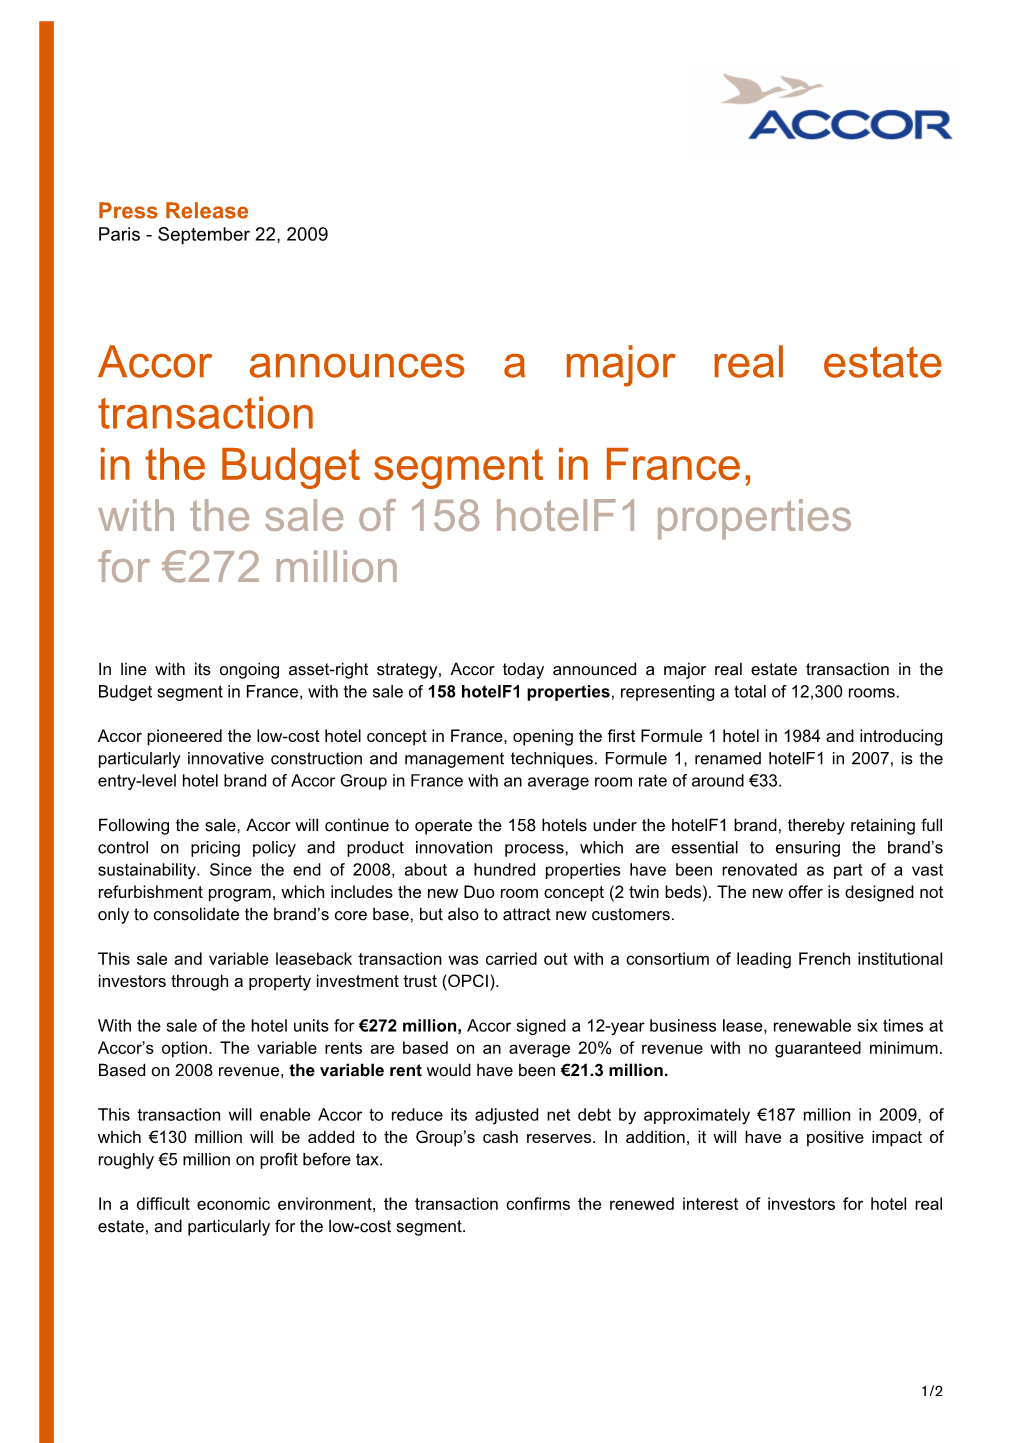 Accor Announces a Major Real Estate Transaction in the Budget Segment in France, with the Sale of 158 Hotelf1 Properties for €272 Million